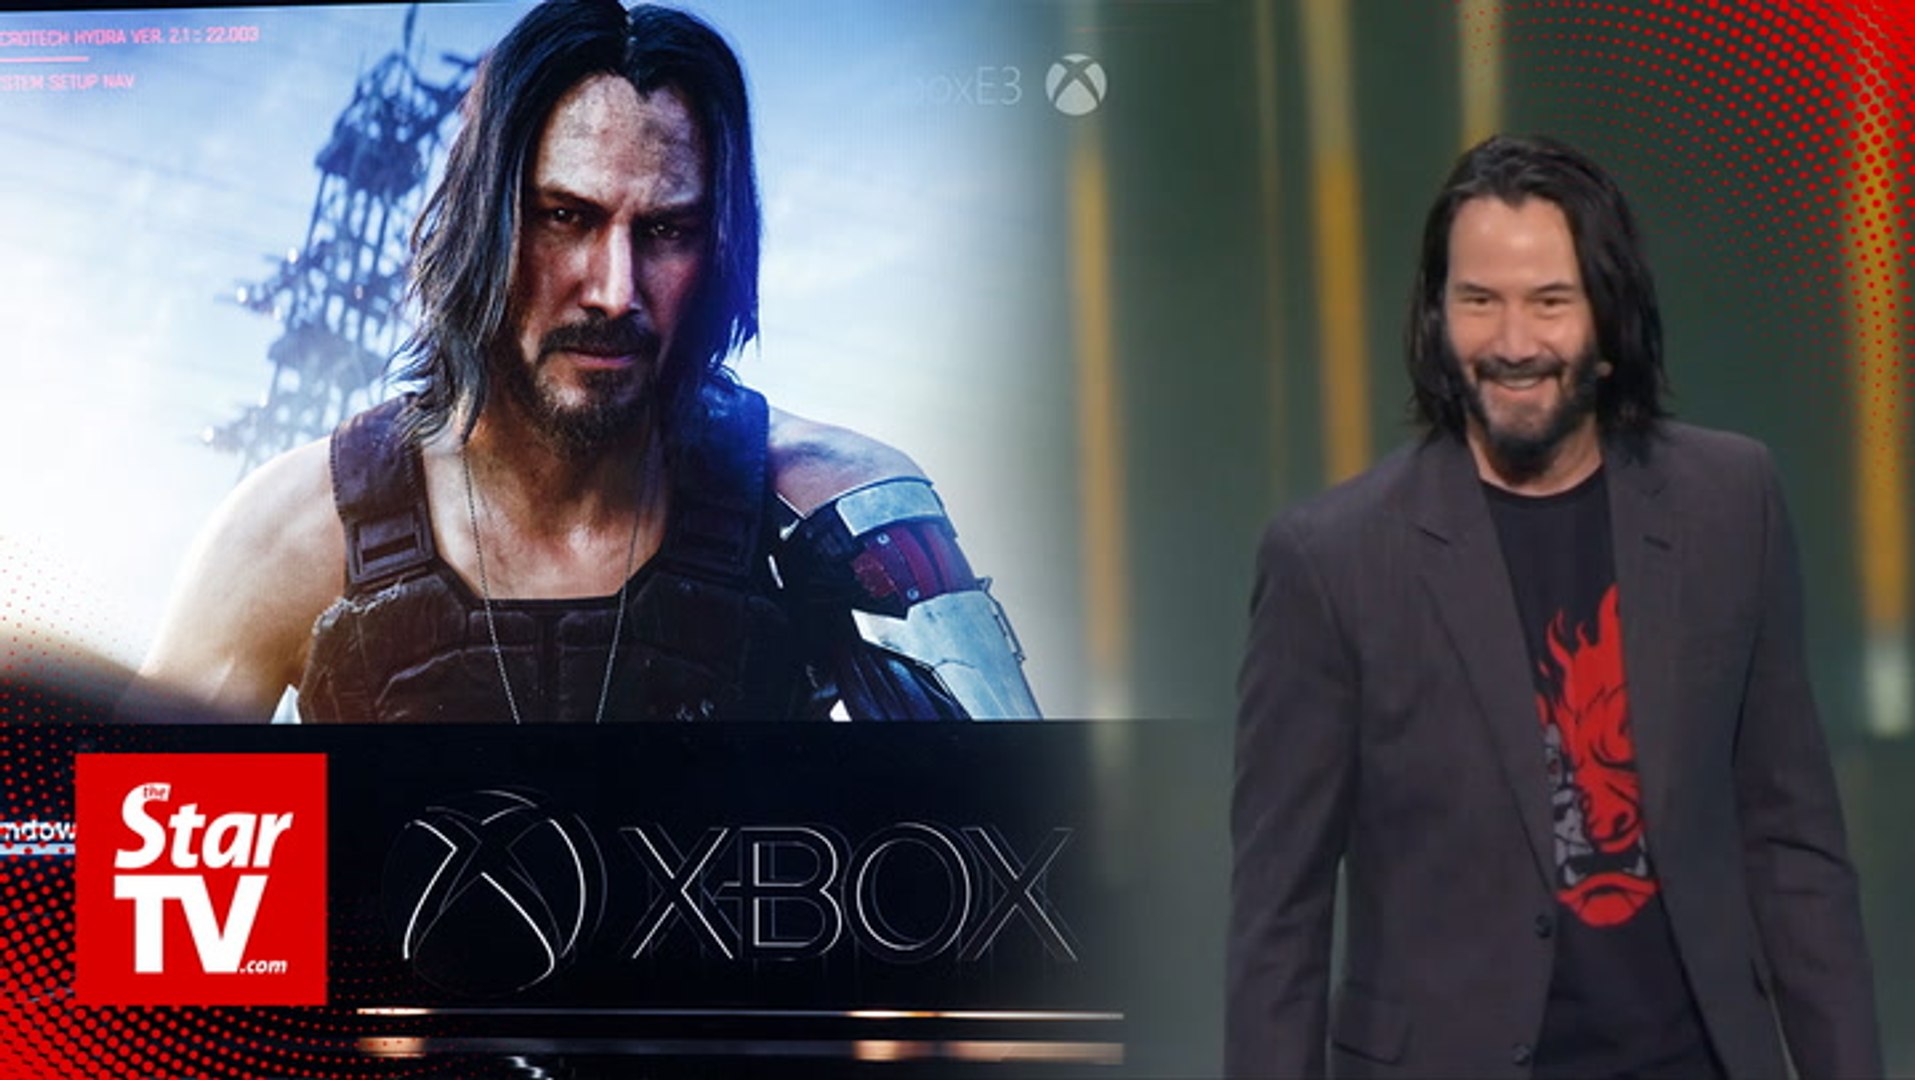 Xbox and Keanu Reeves unveil new console and games - video Dailymotion